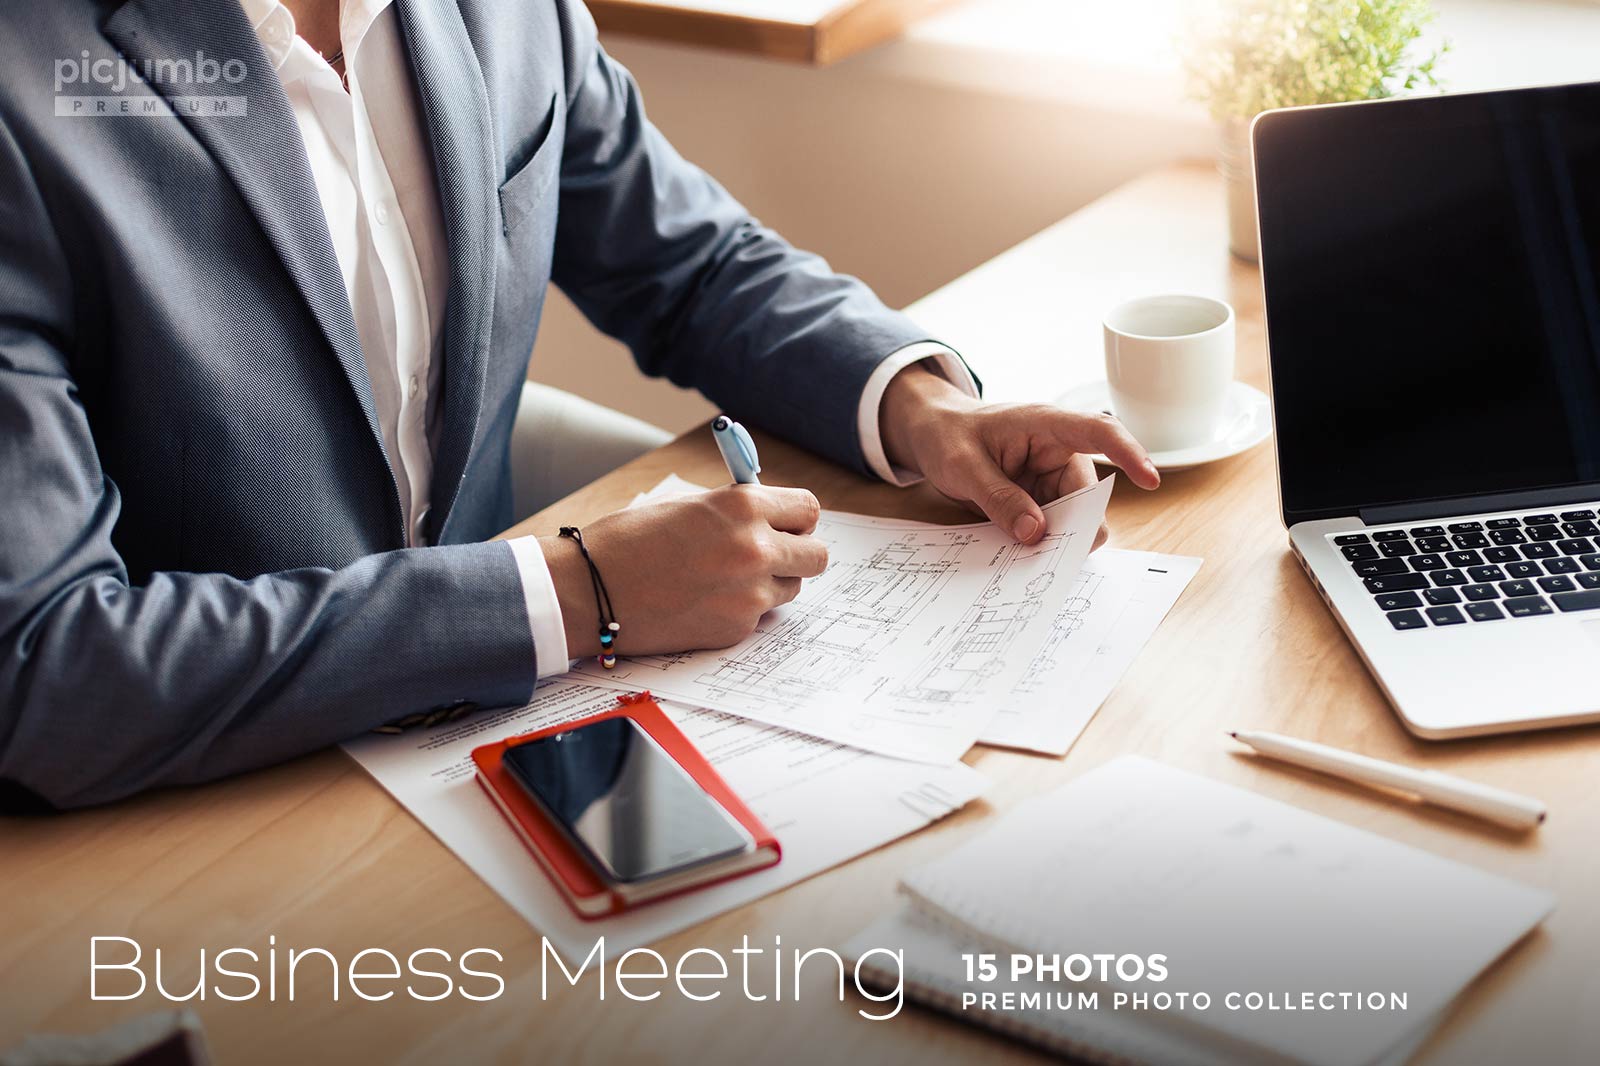 Download hi-res stock photos from our Business Meeting PREMIUM Collection!